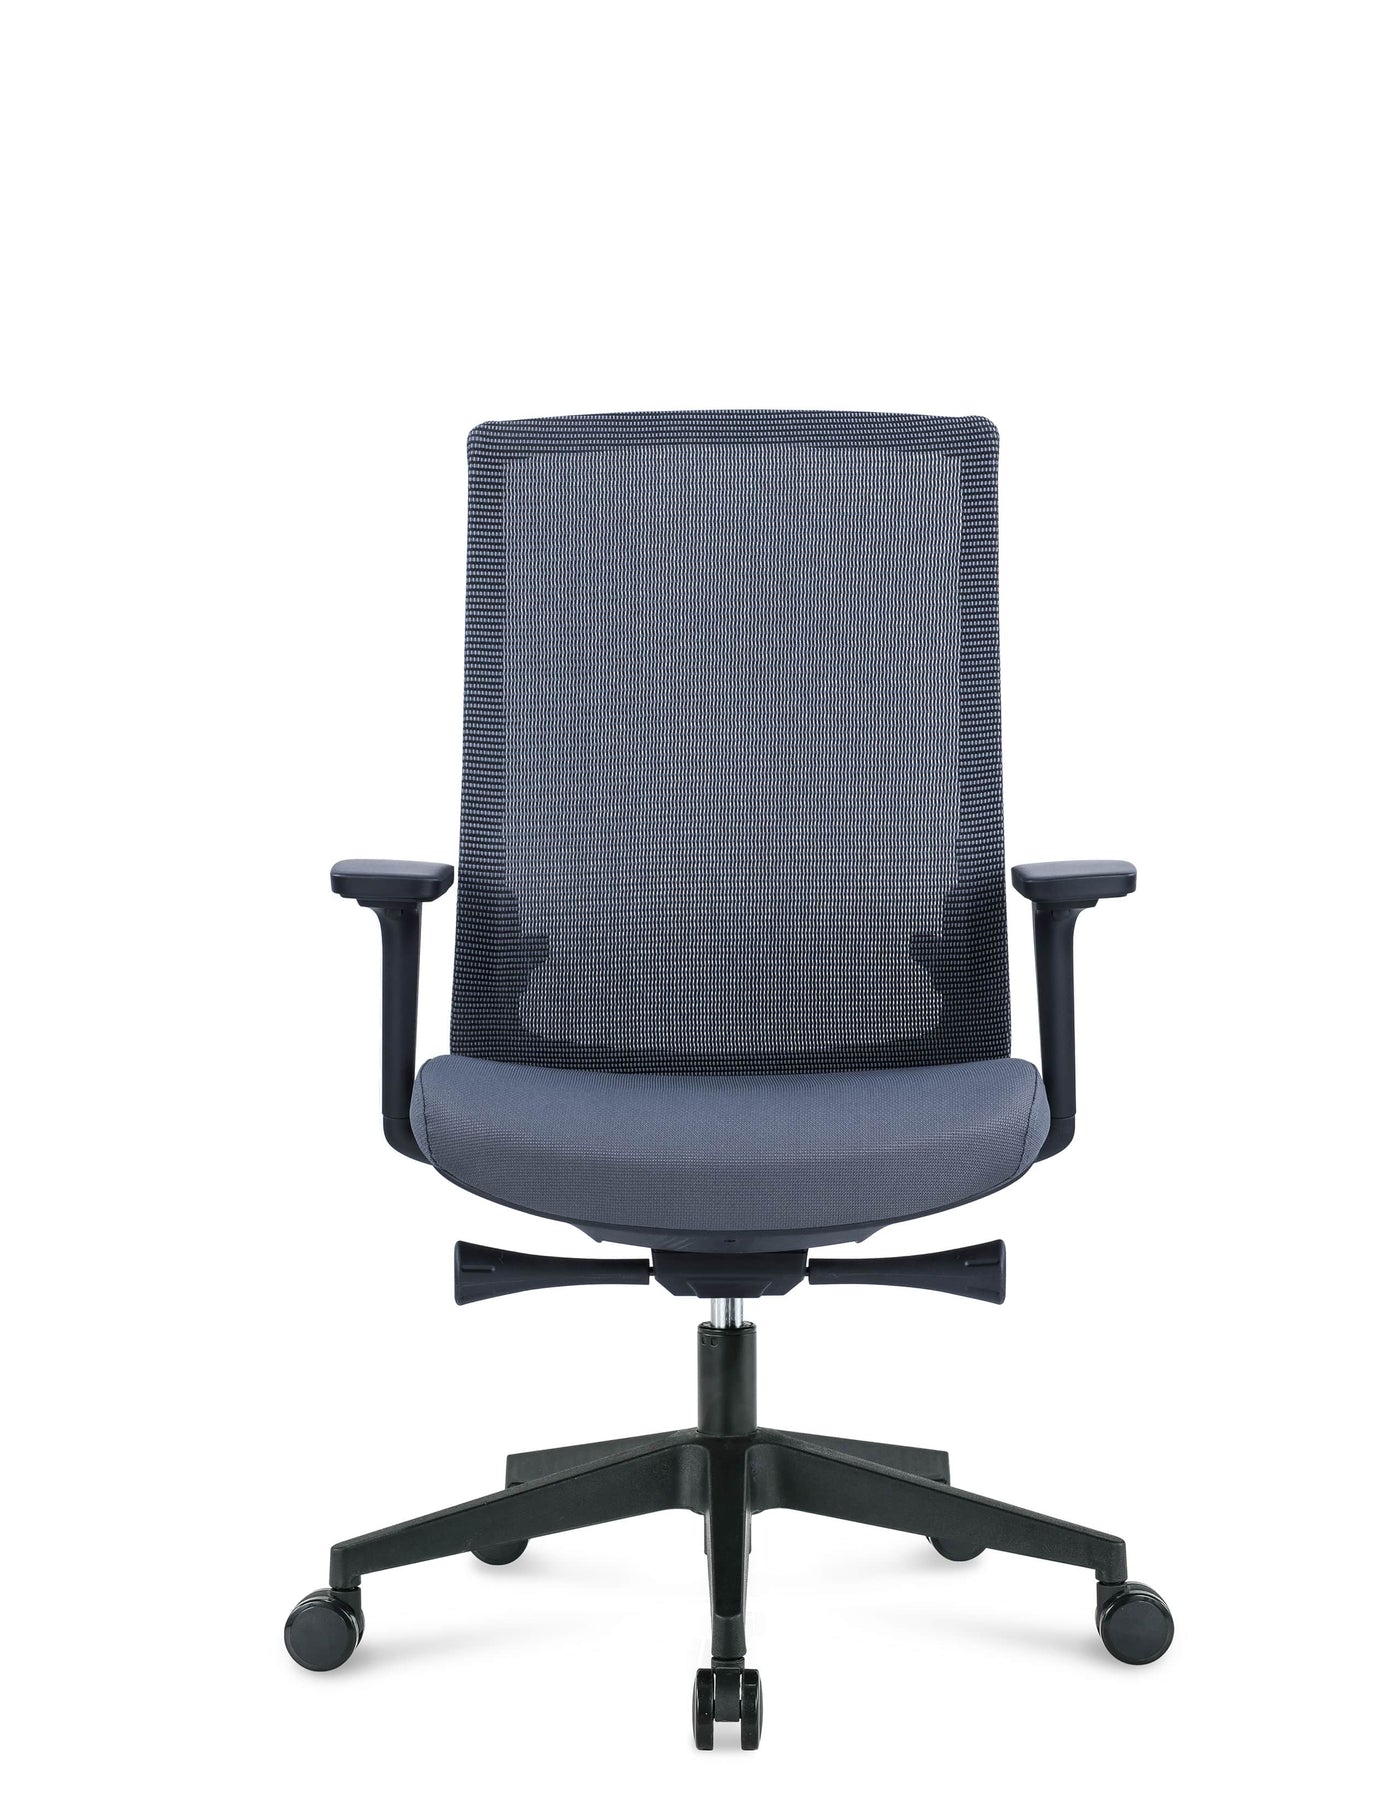 i8 Pure Home Office Chair | Ergonomic Office Chair | Fully Adjustable Ergonomic Home Office Chair | Home Office Furniture